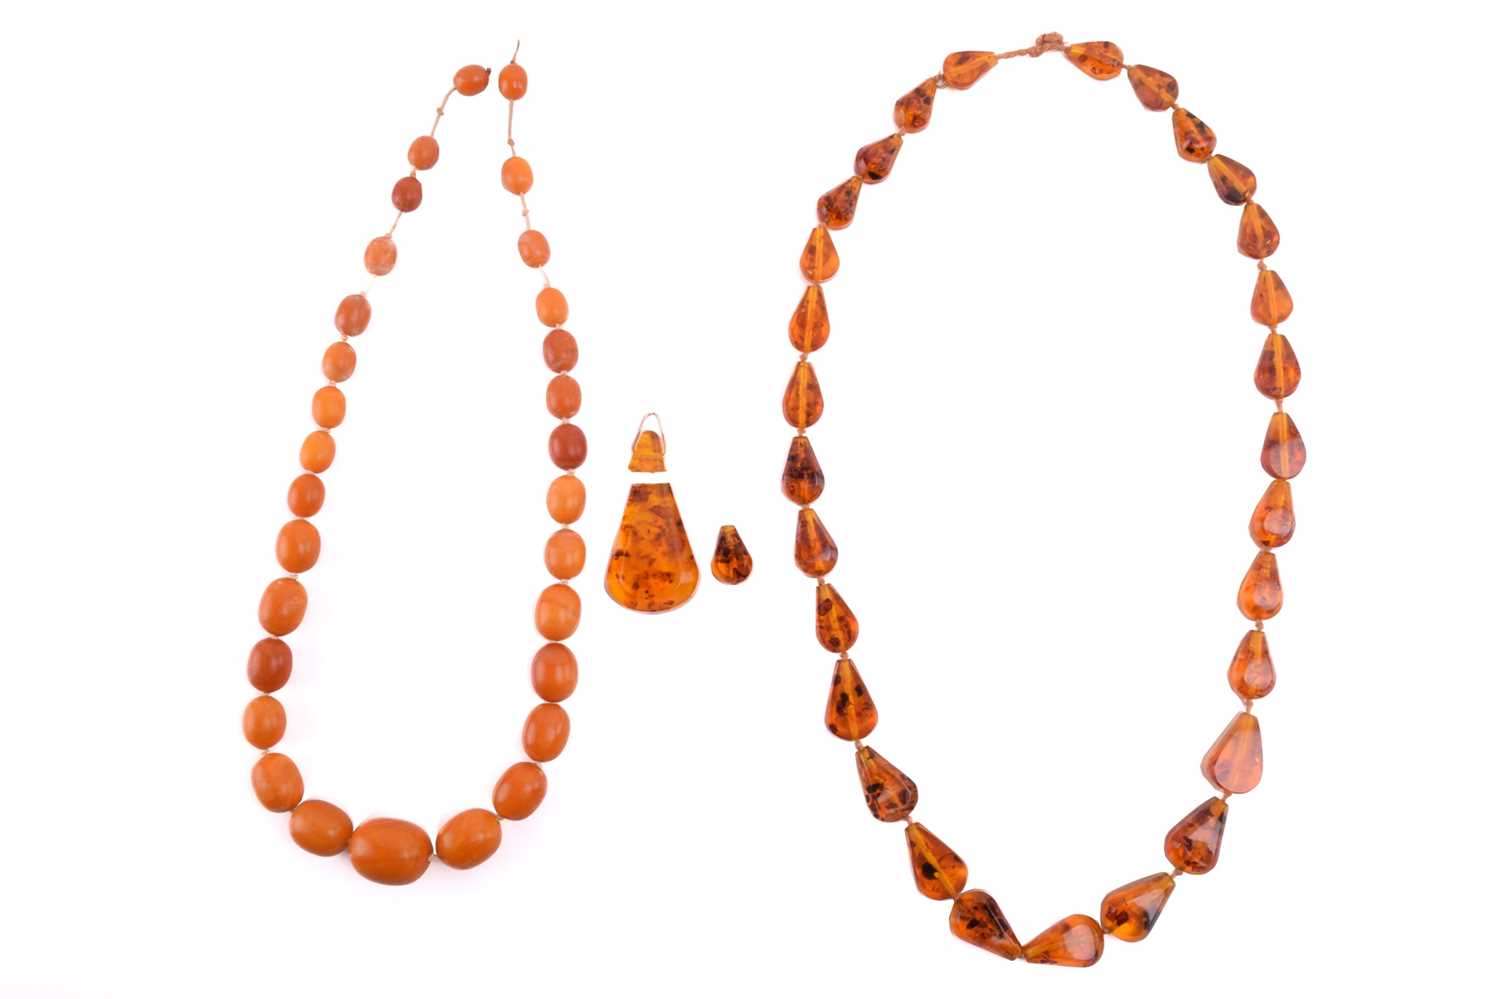 Amber Necklace Made of Large Oval Shape Amber Beads.